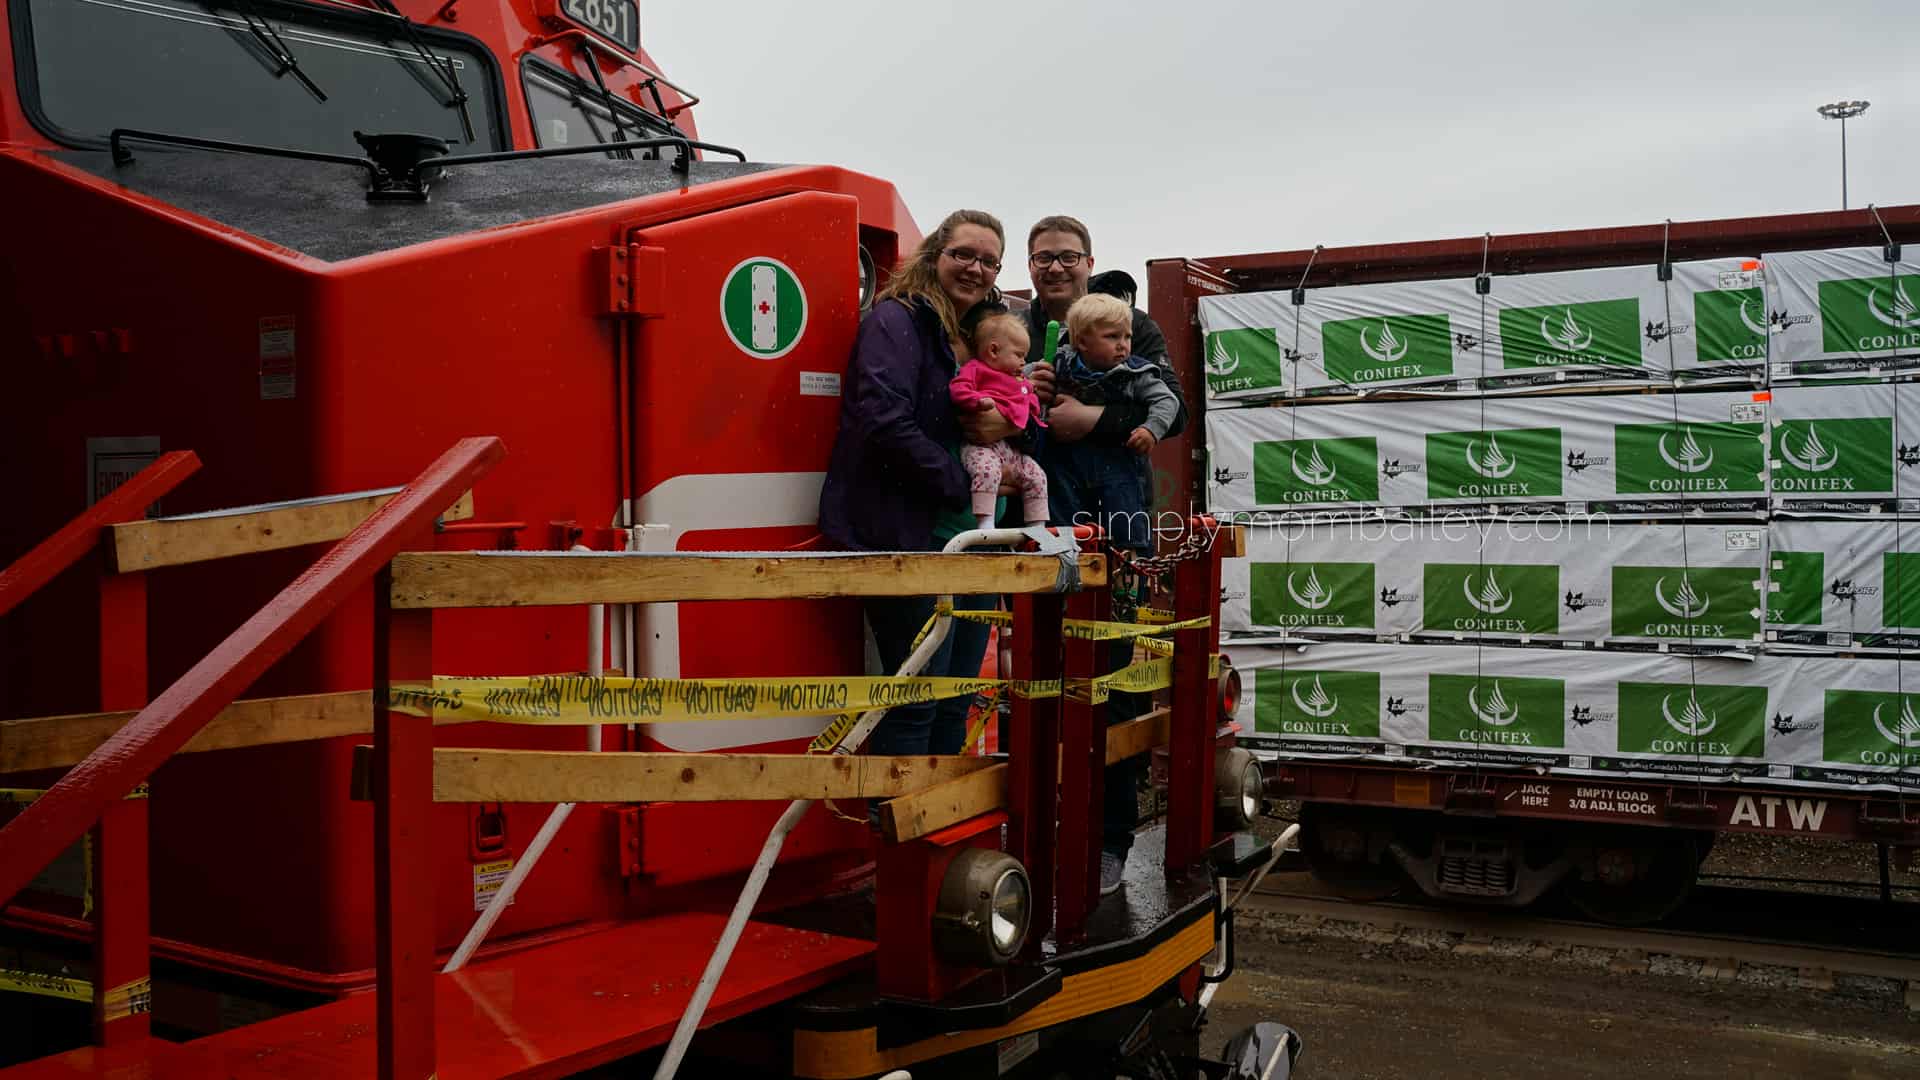 What I've Given Up for the Railway Life - Railroad Career impact on Family